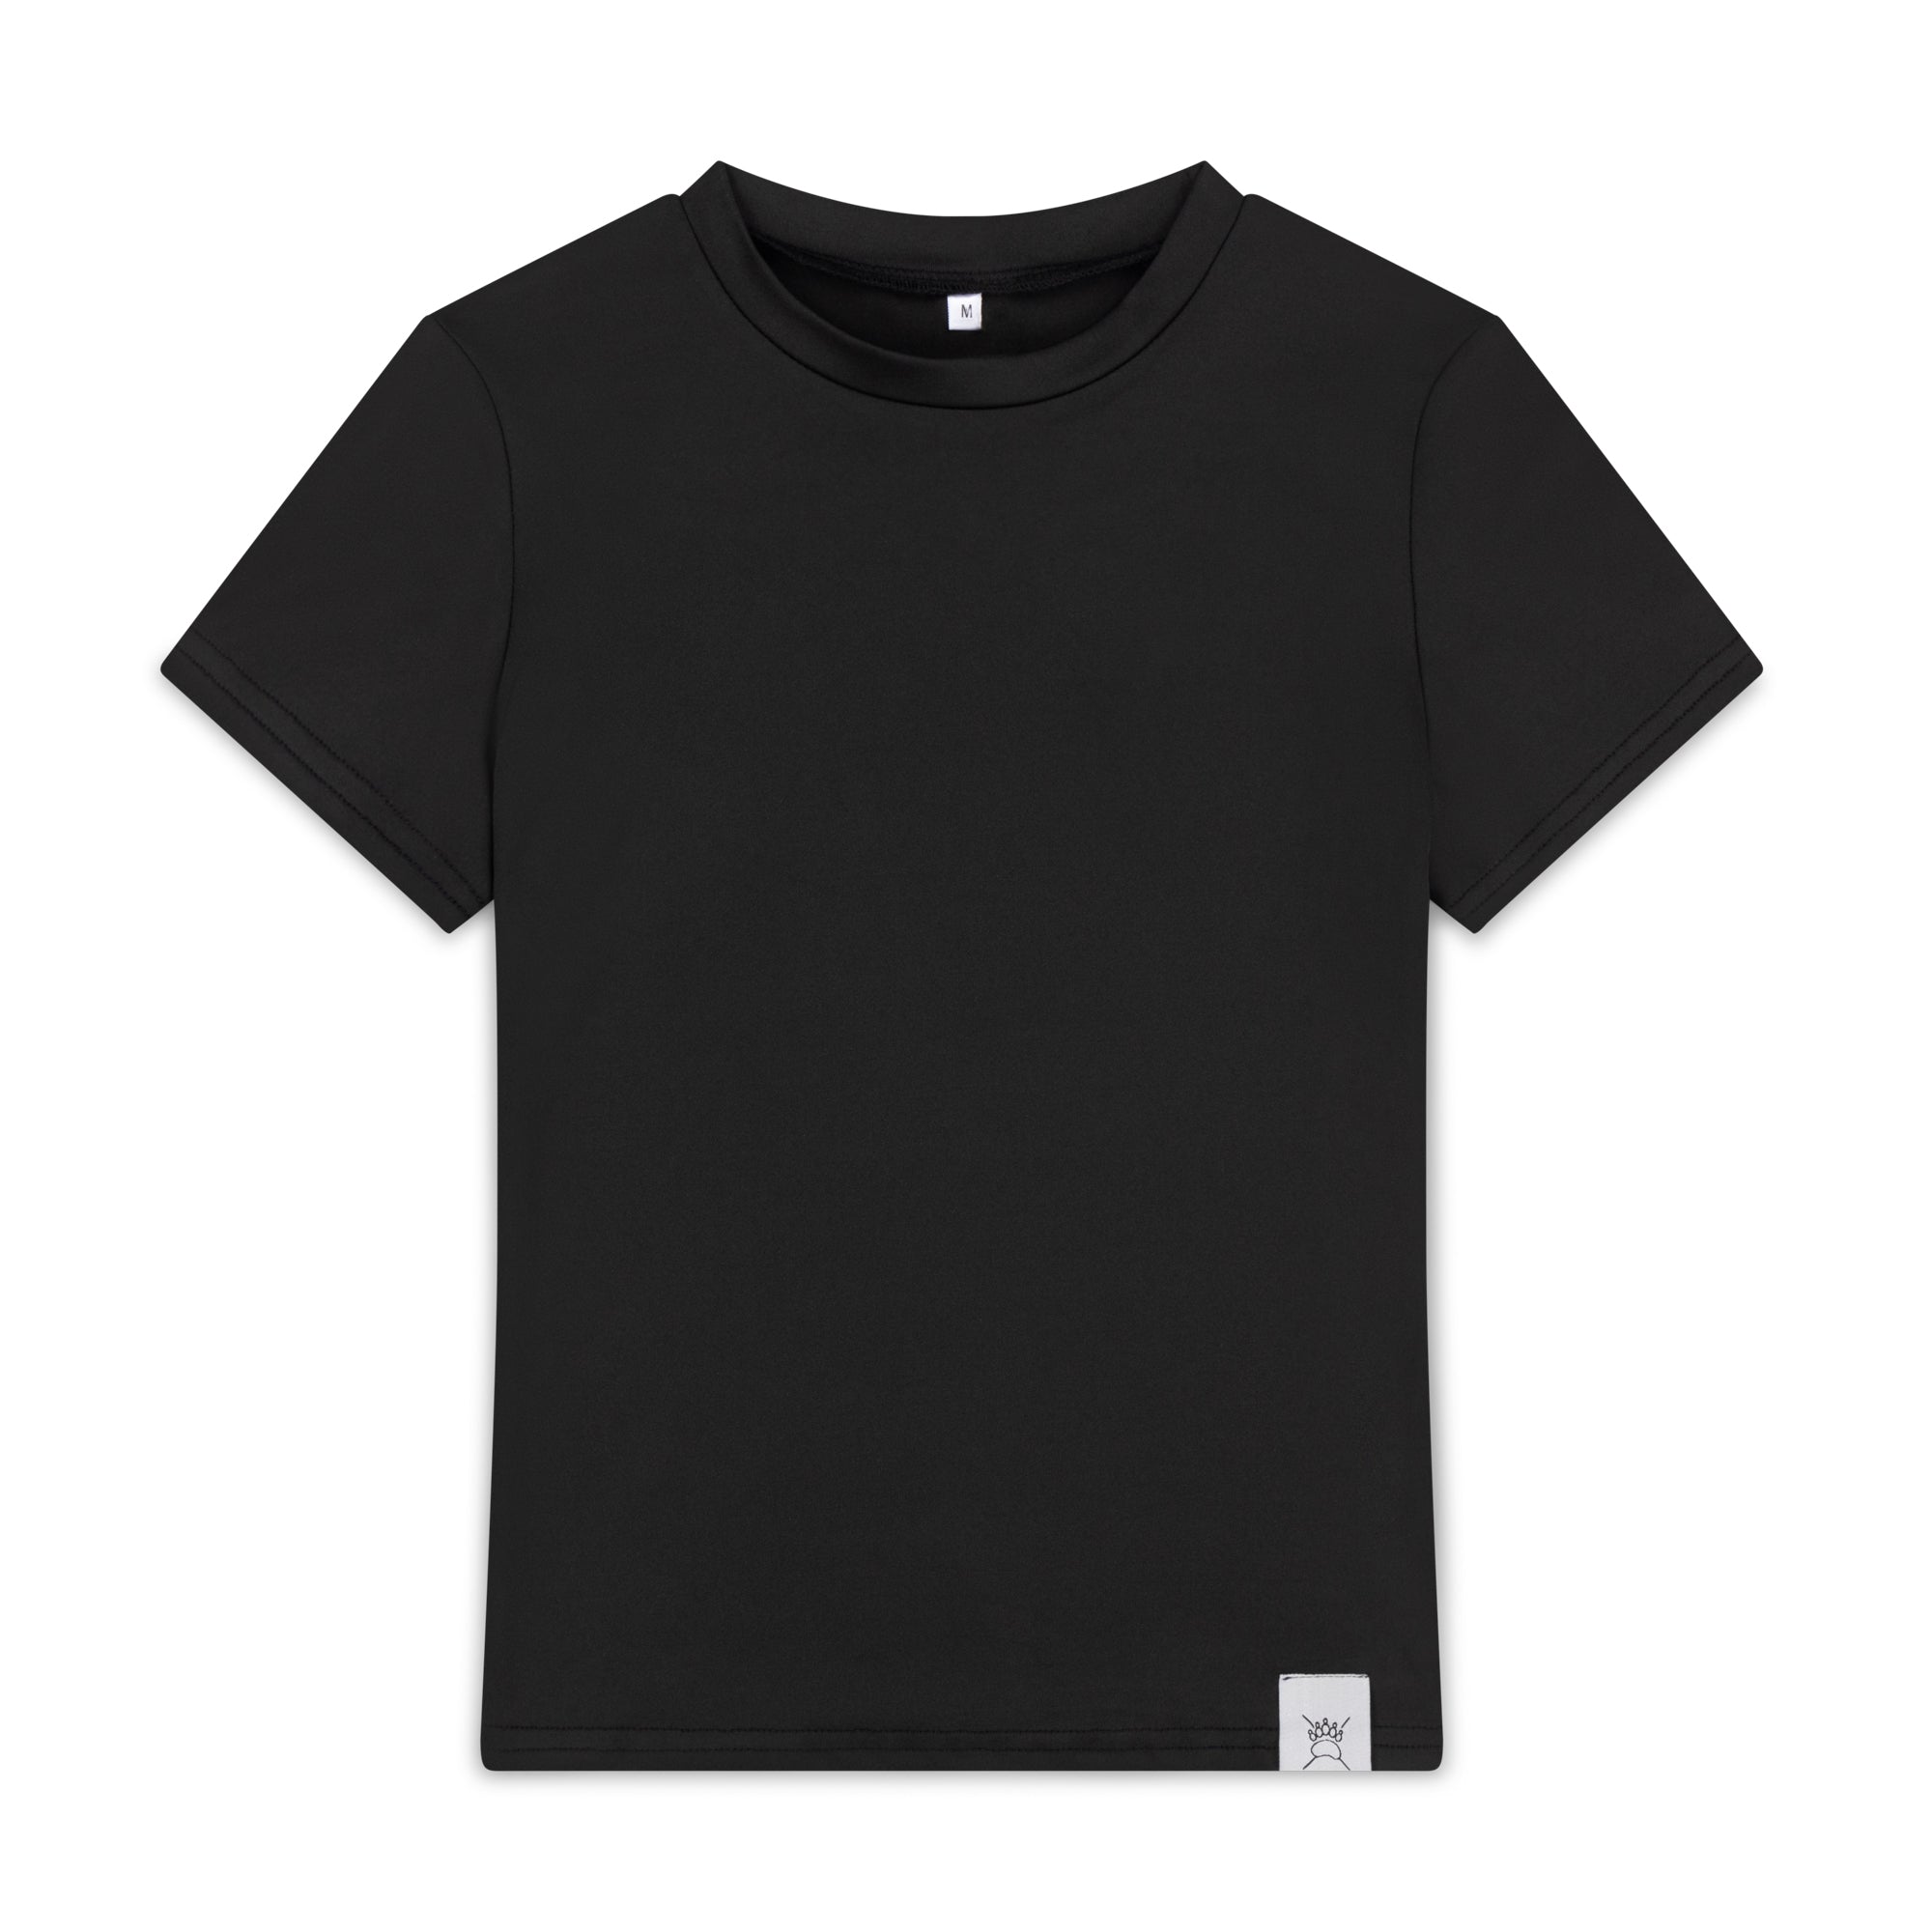 Black Crop T Shirt | Long Sleeve Crop Tops | The Survival Couture